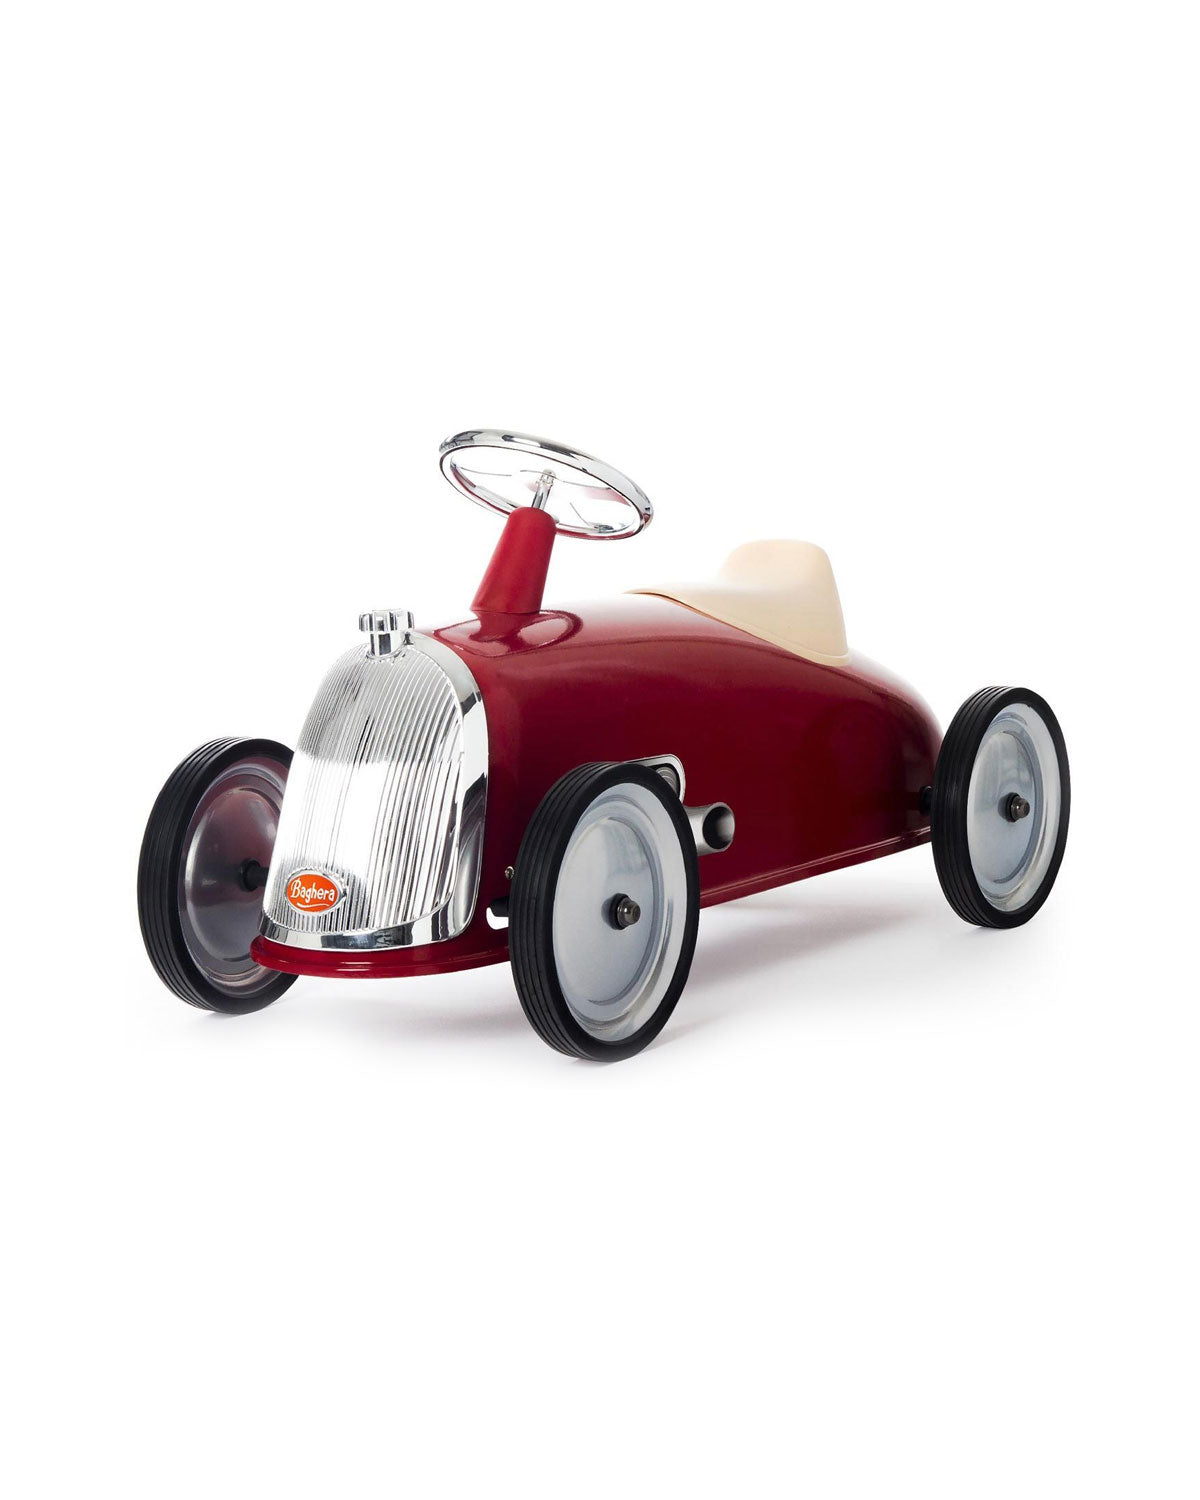 Baghera Ride-On RIDER Red